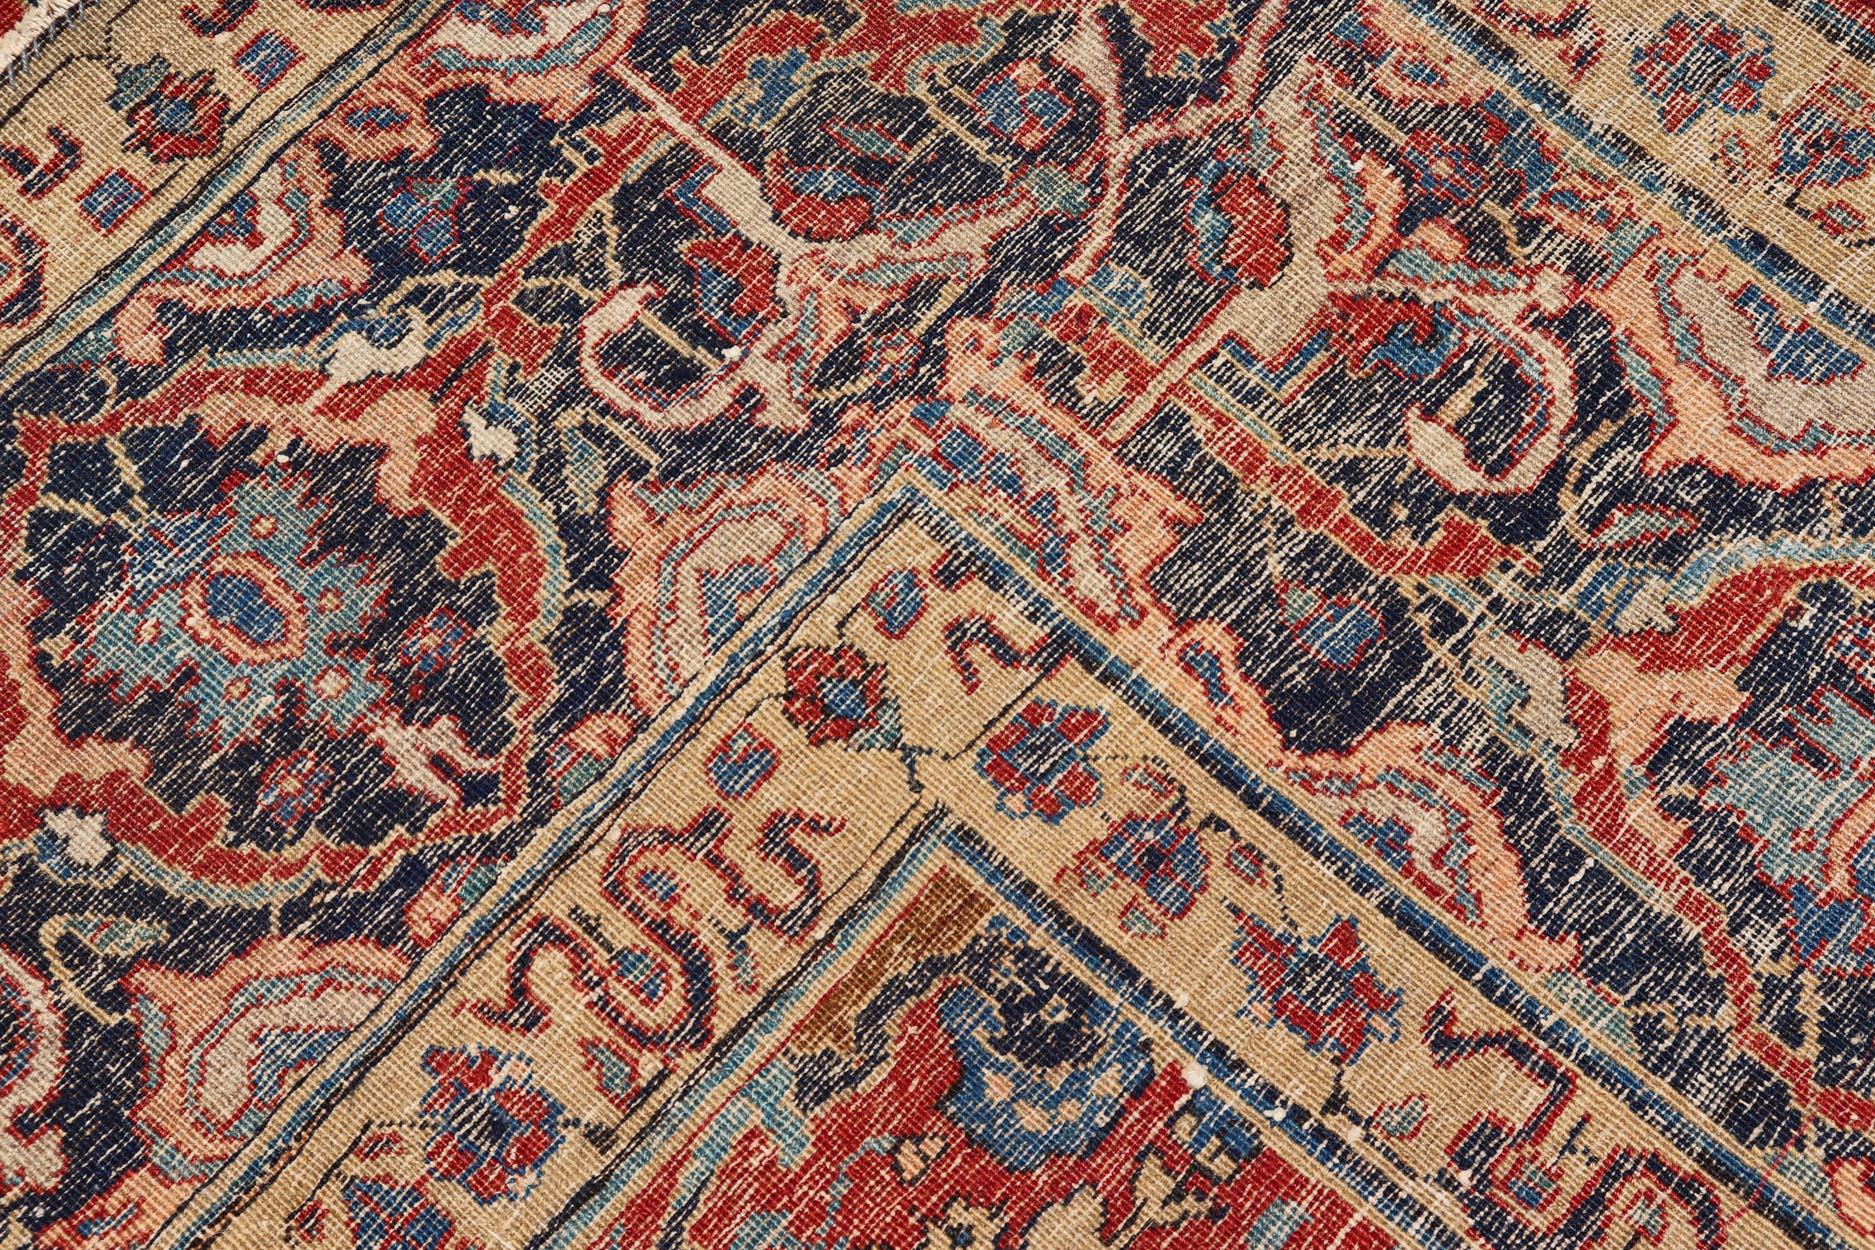 Antique Tabriz Rug with All Over Design in Rust Red, Blue's, Yellow, and L. Blue. Keivan Woven Arts / rug H8-0601, country of origin / type: Iran / Tabriz, circa 1910s.

Measures: 9'7 x 13'3.

This compelling antique Tabriz was woven in Persia